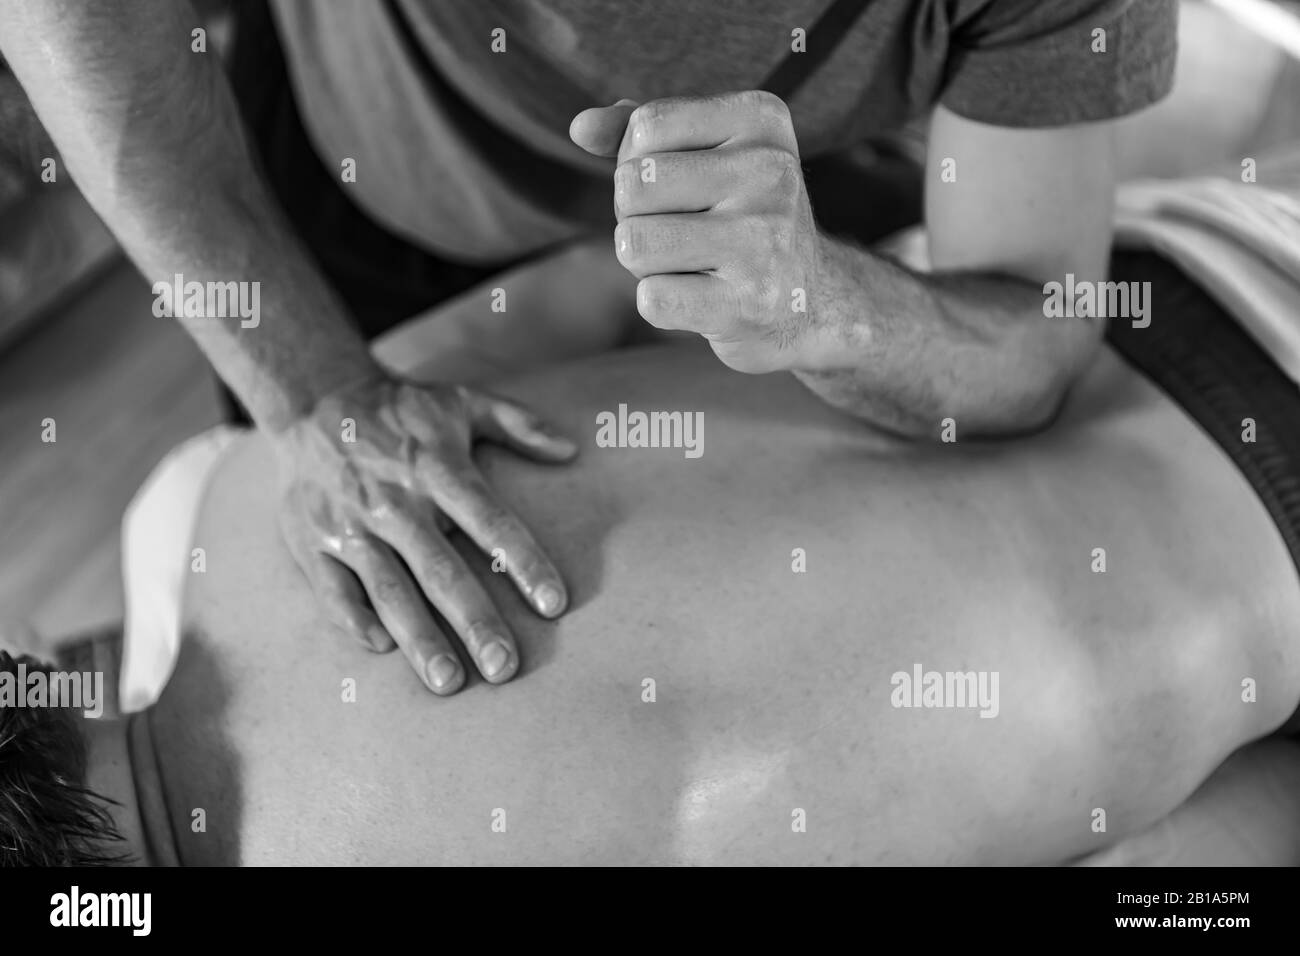 A young sports massage therapist applying pressure with the elbow. Therapeutic body massage treatment. Black and white toned image Stock Photo